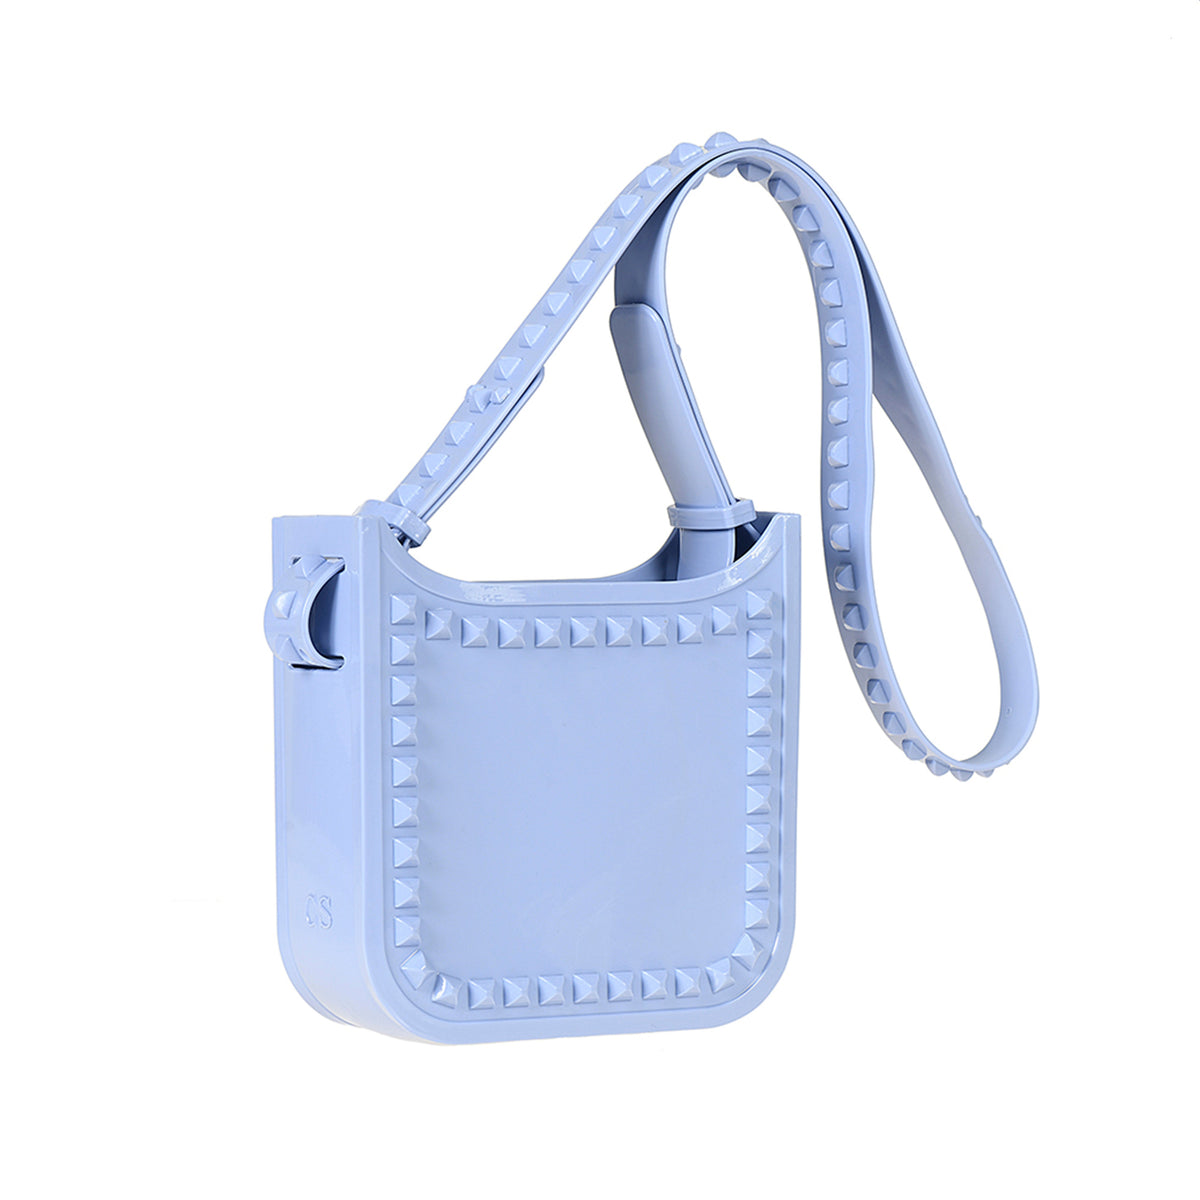 Rose scented Lisa small crossbody beach bags for women in baby blue